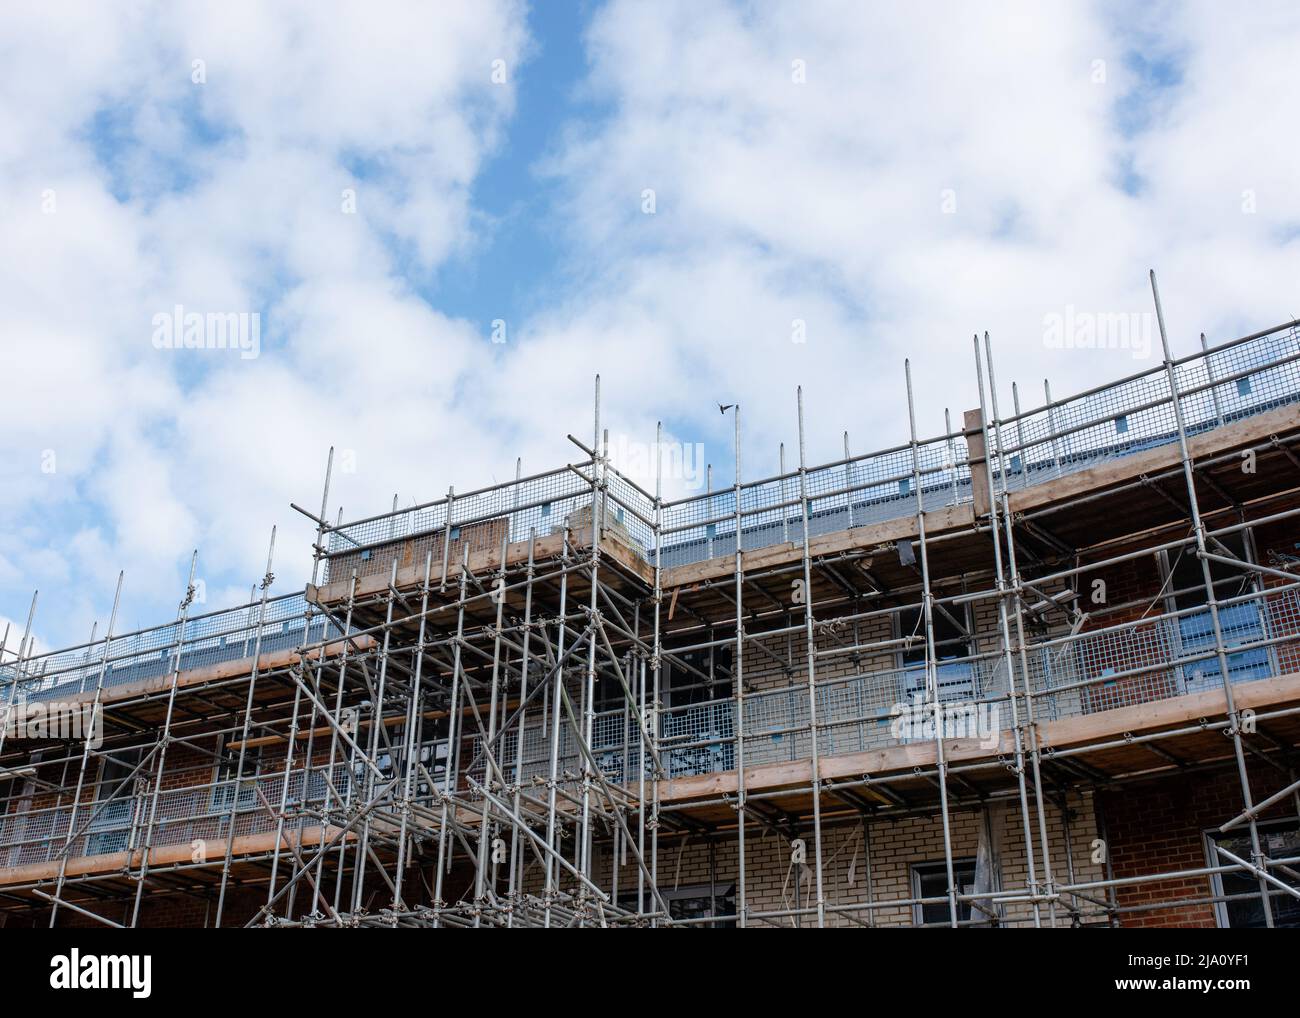 New residential multistorey appartment building made of brick and concrete block, with scaffolds erected around it to provide access for external work Stock Photo